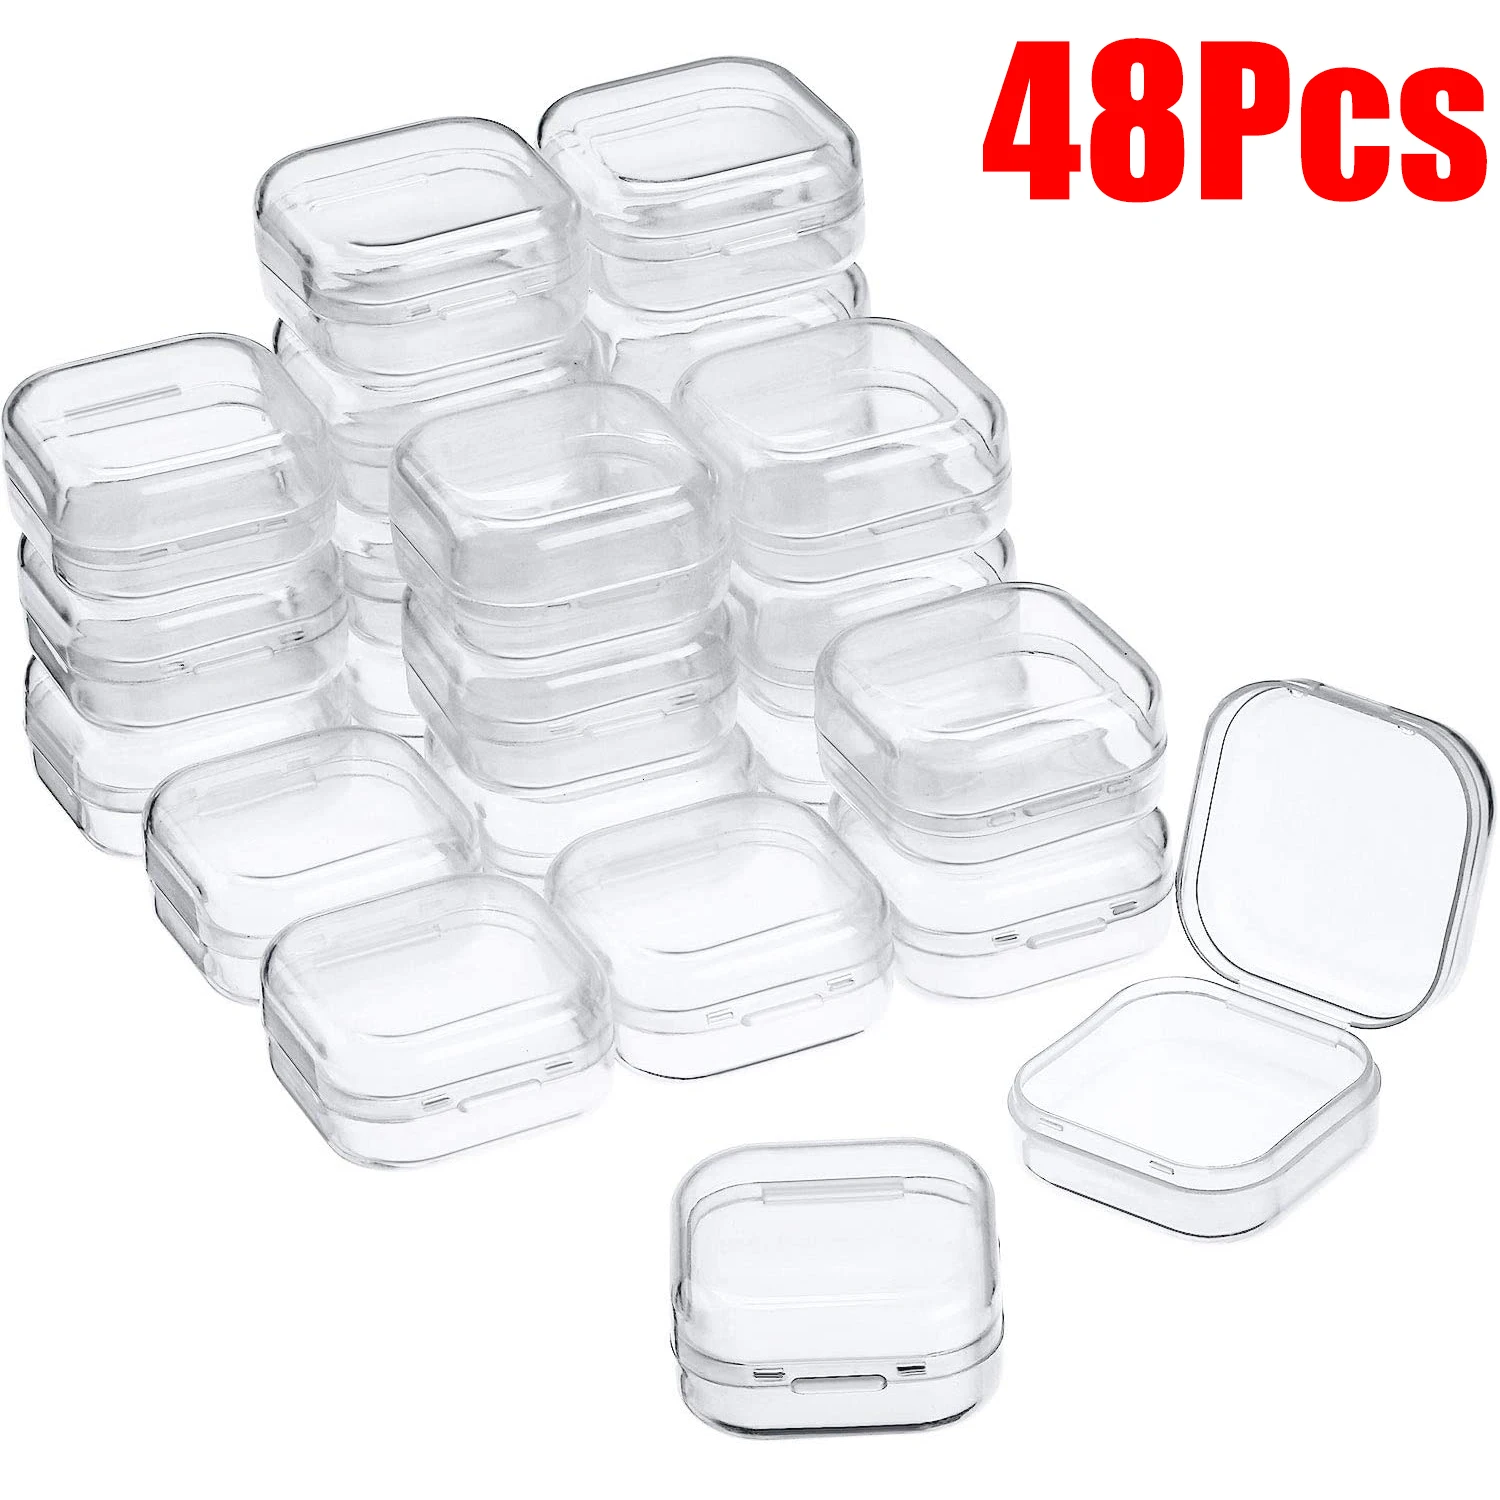 48Pcs 3.5*3.5*1.8cm Mini Clear Plastic Storage Box Container with Lids Empty Hinged Boxes for Beads DIY Craft Jewelry Making